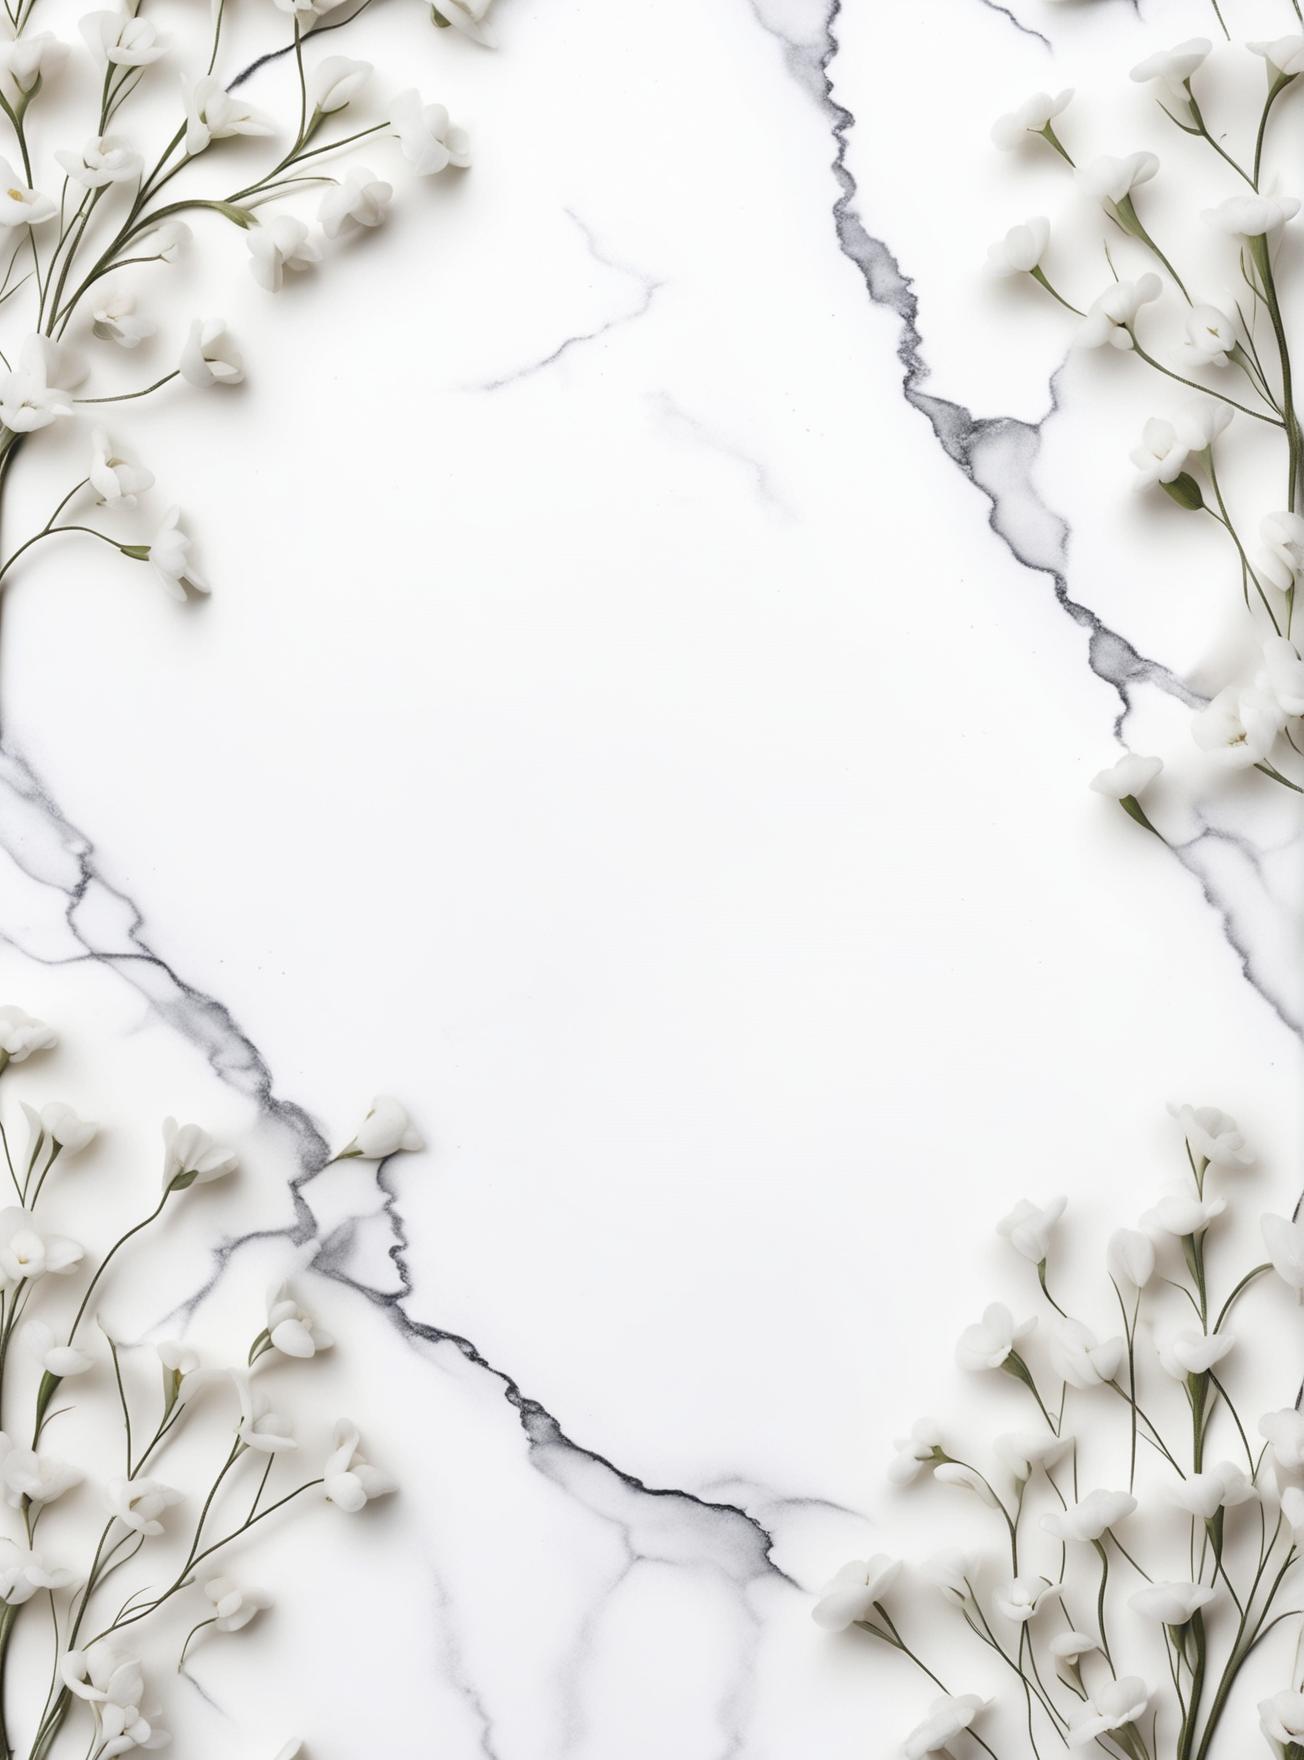 A beautiful wallpaper design with a white marble background and dainty white baby's breath flowers slightly framing the wallpaper